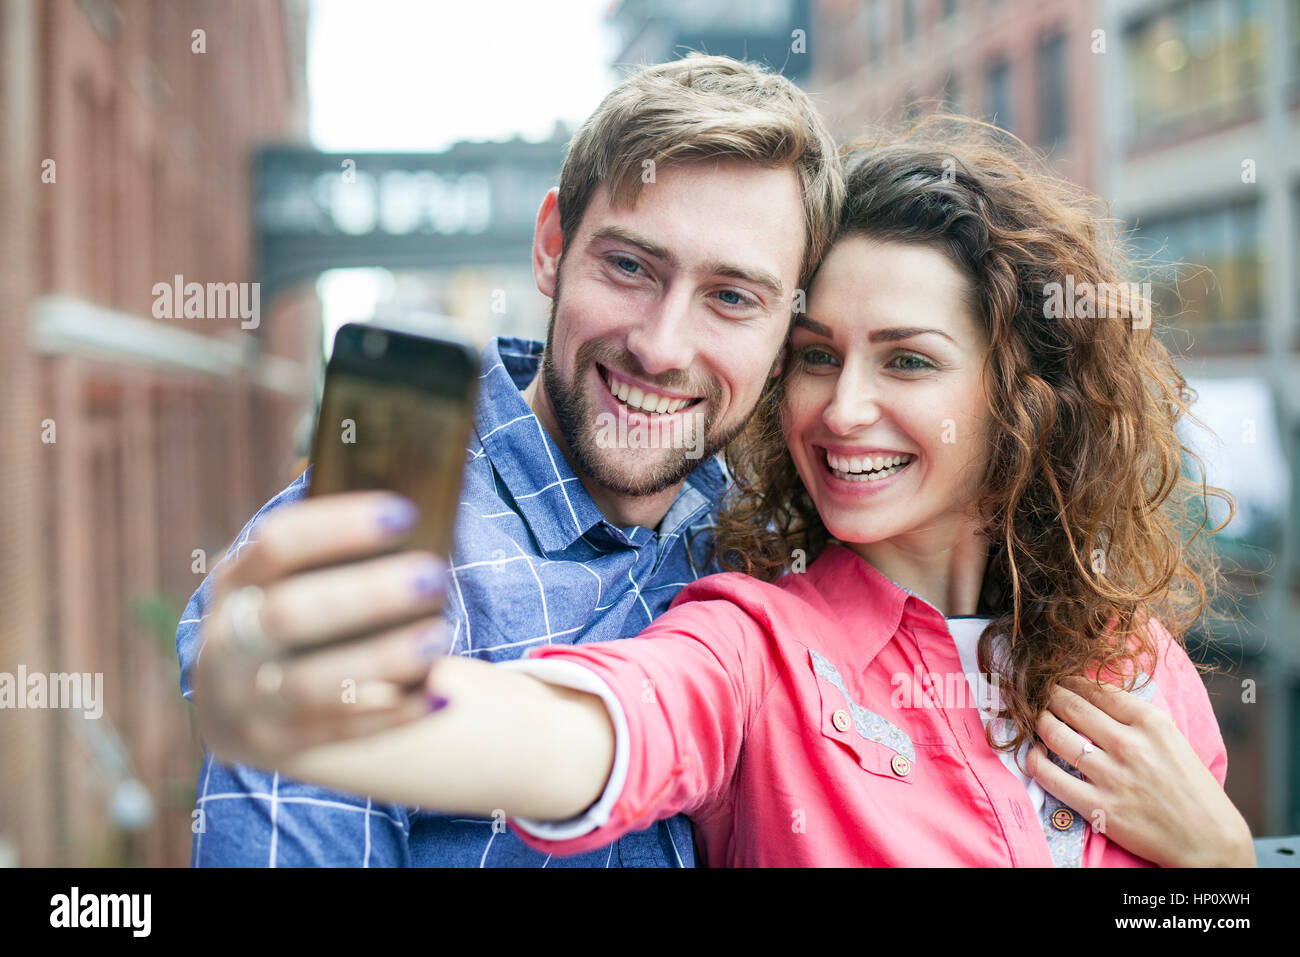 Couple taking a selfie together outdoors Stock Photo